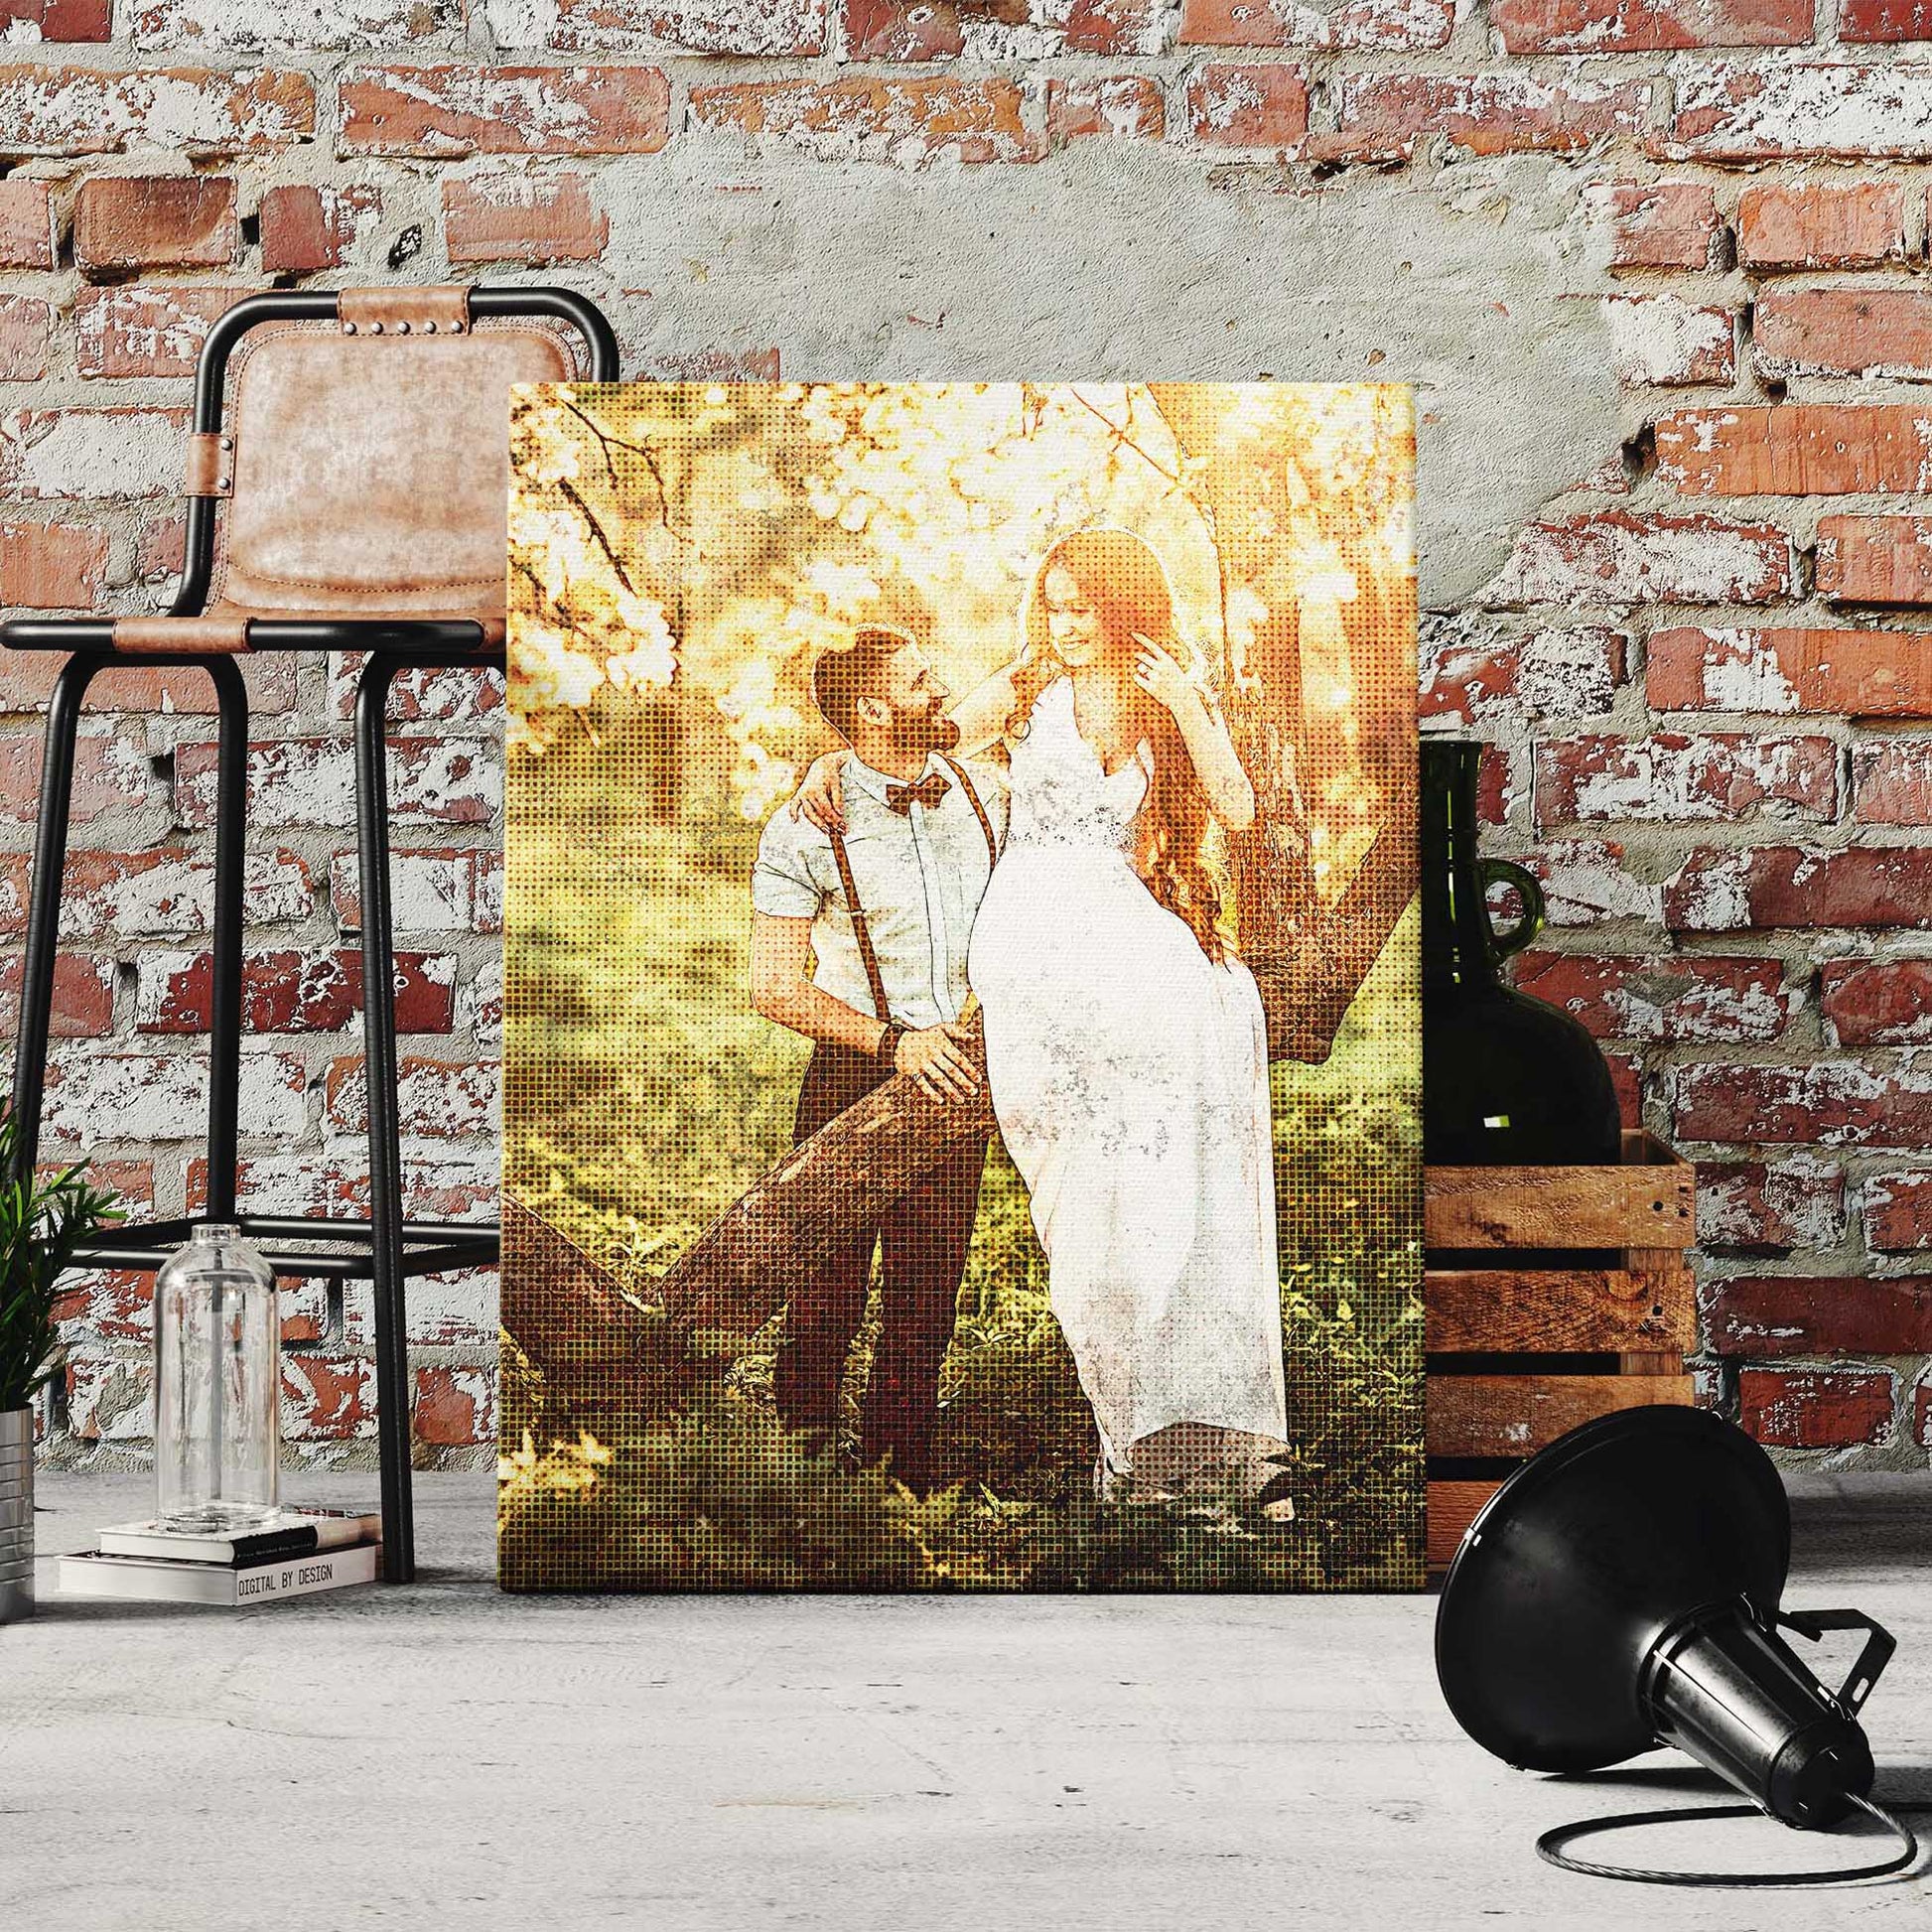 Add a touch of retro coolness to your space with our Personalised Retro Grunge FX Canvas. Its trendy 90s vibe, combined with a unique print from your photo, creates a novel piece of wall art that enhances your home decor